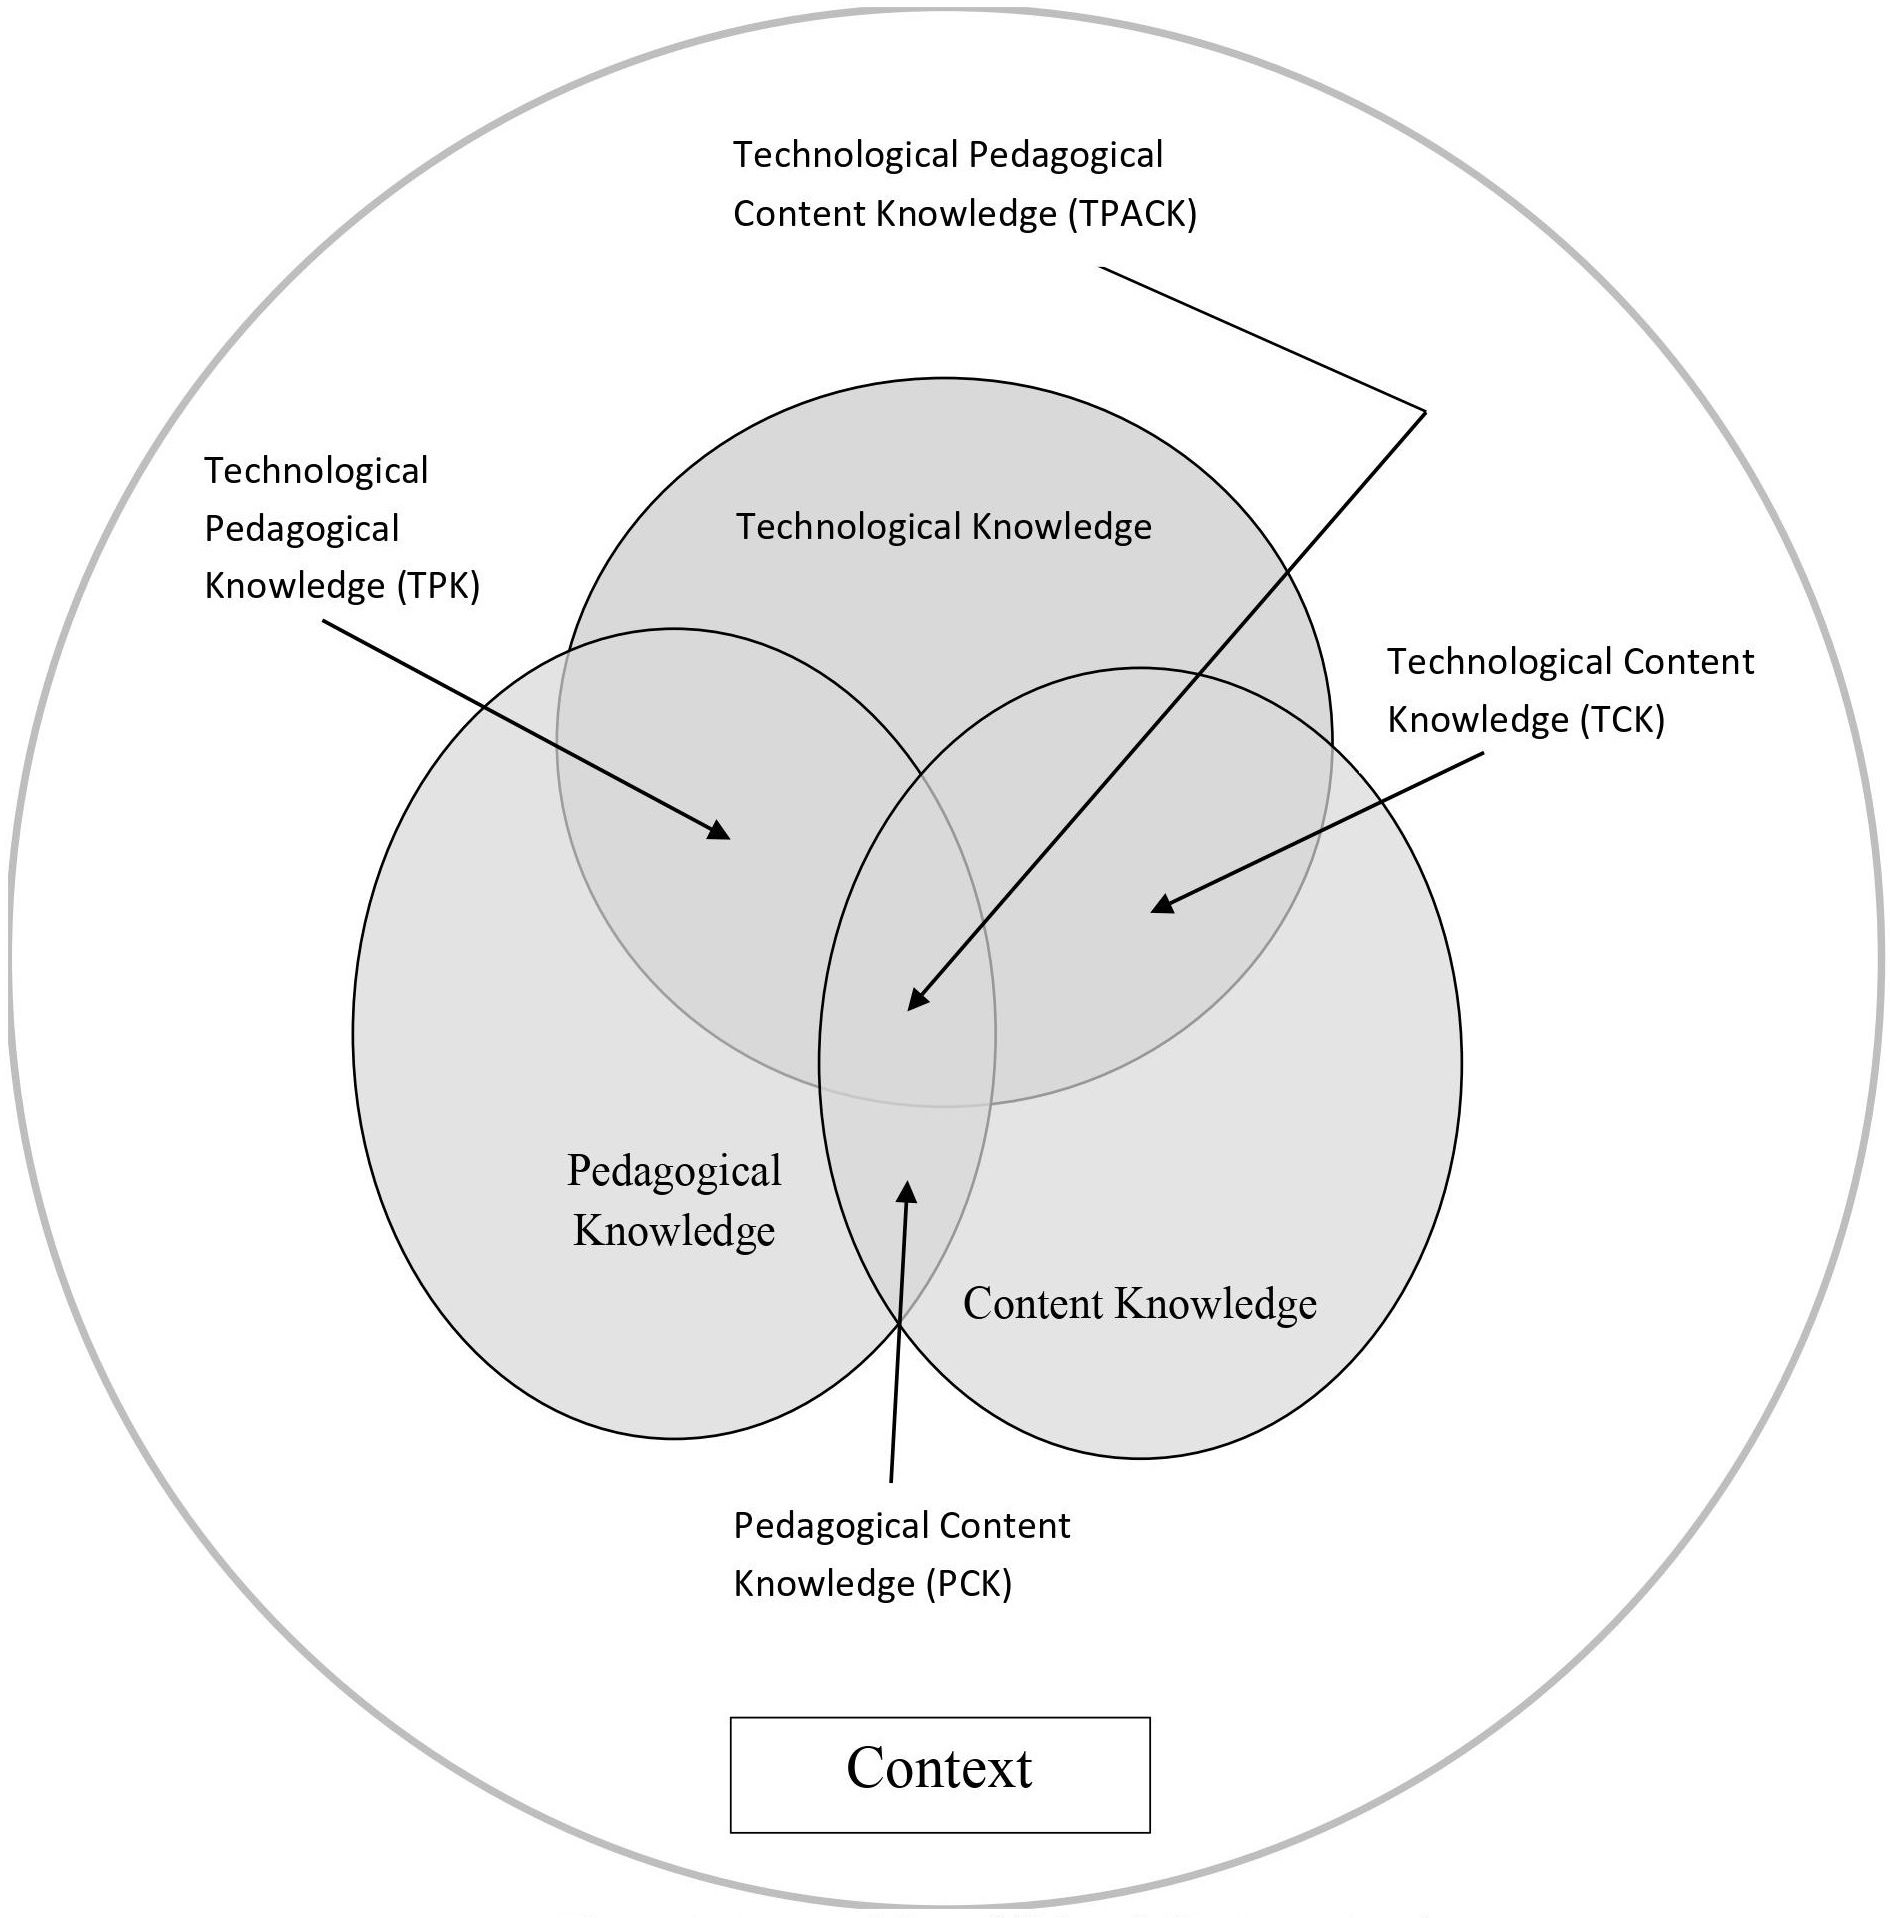 The technological, pedagogical, and content knowledge (TPACK) framework [adapted from Mishra and Koehler (2006)]